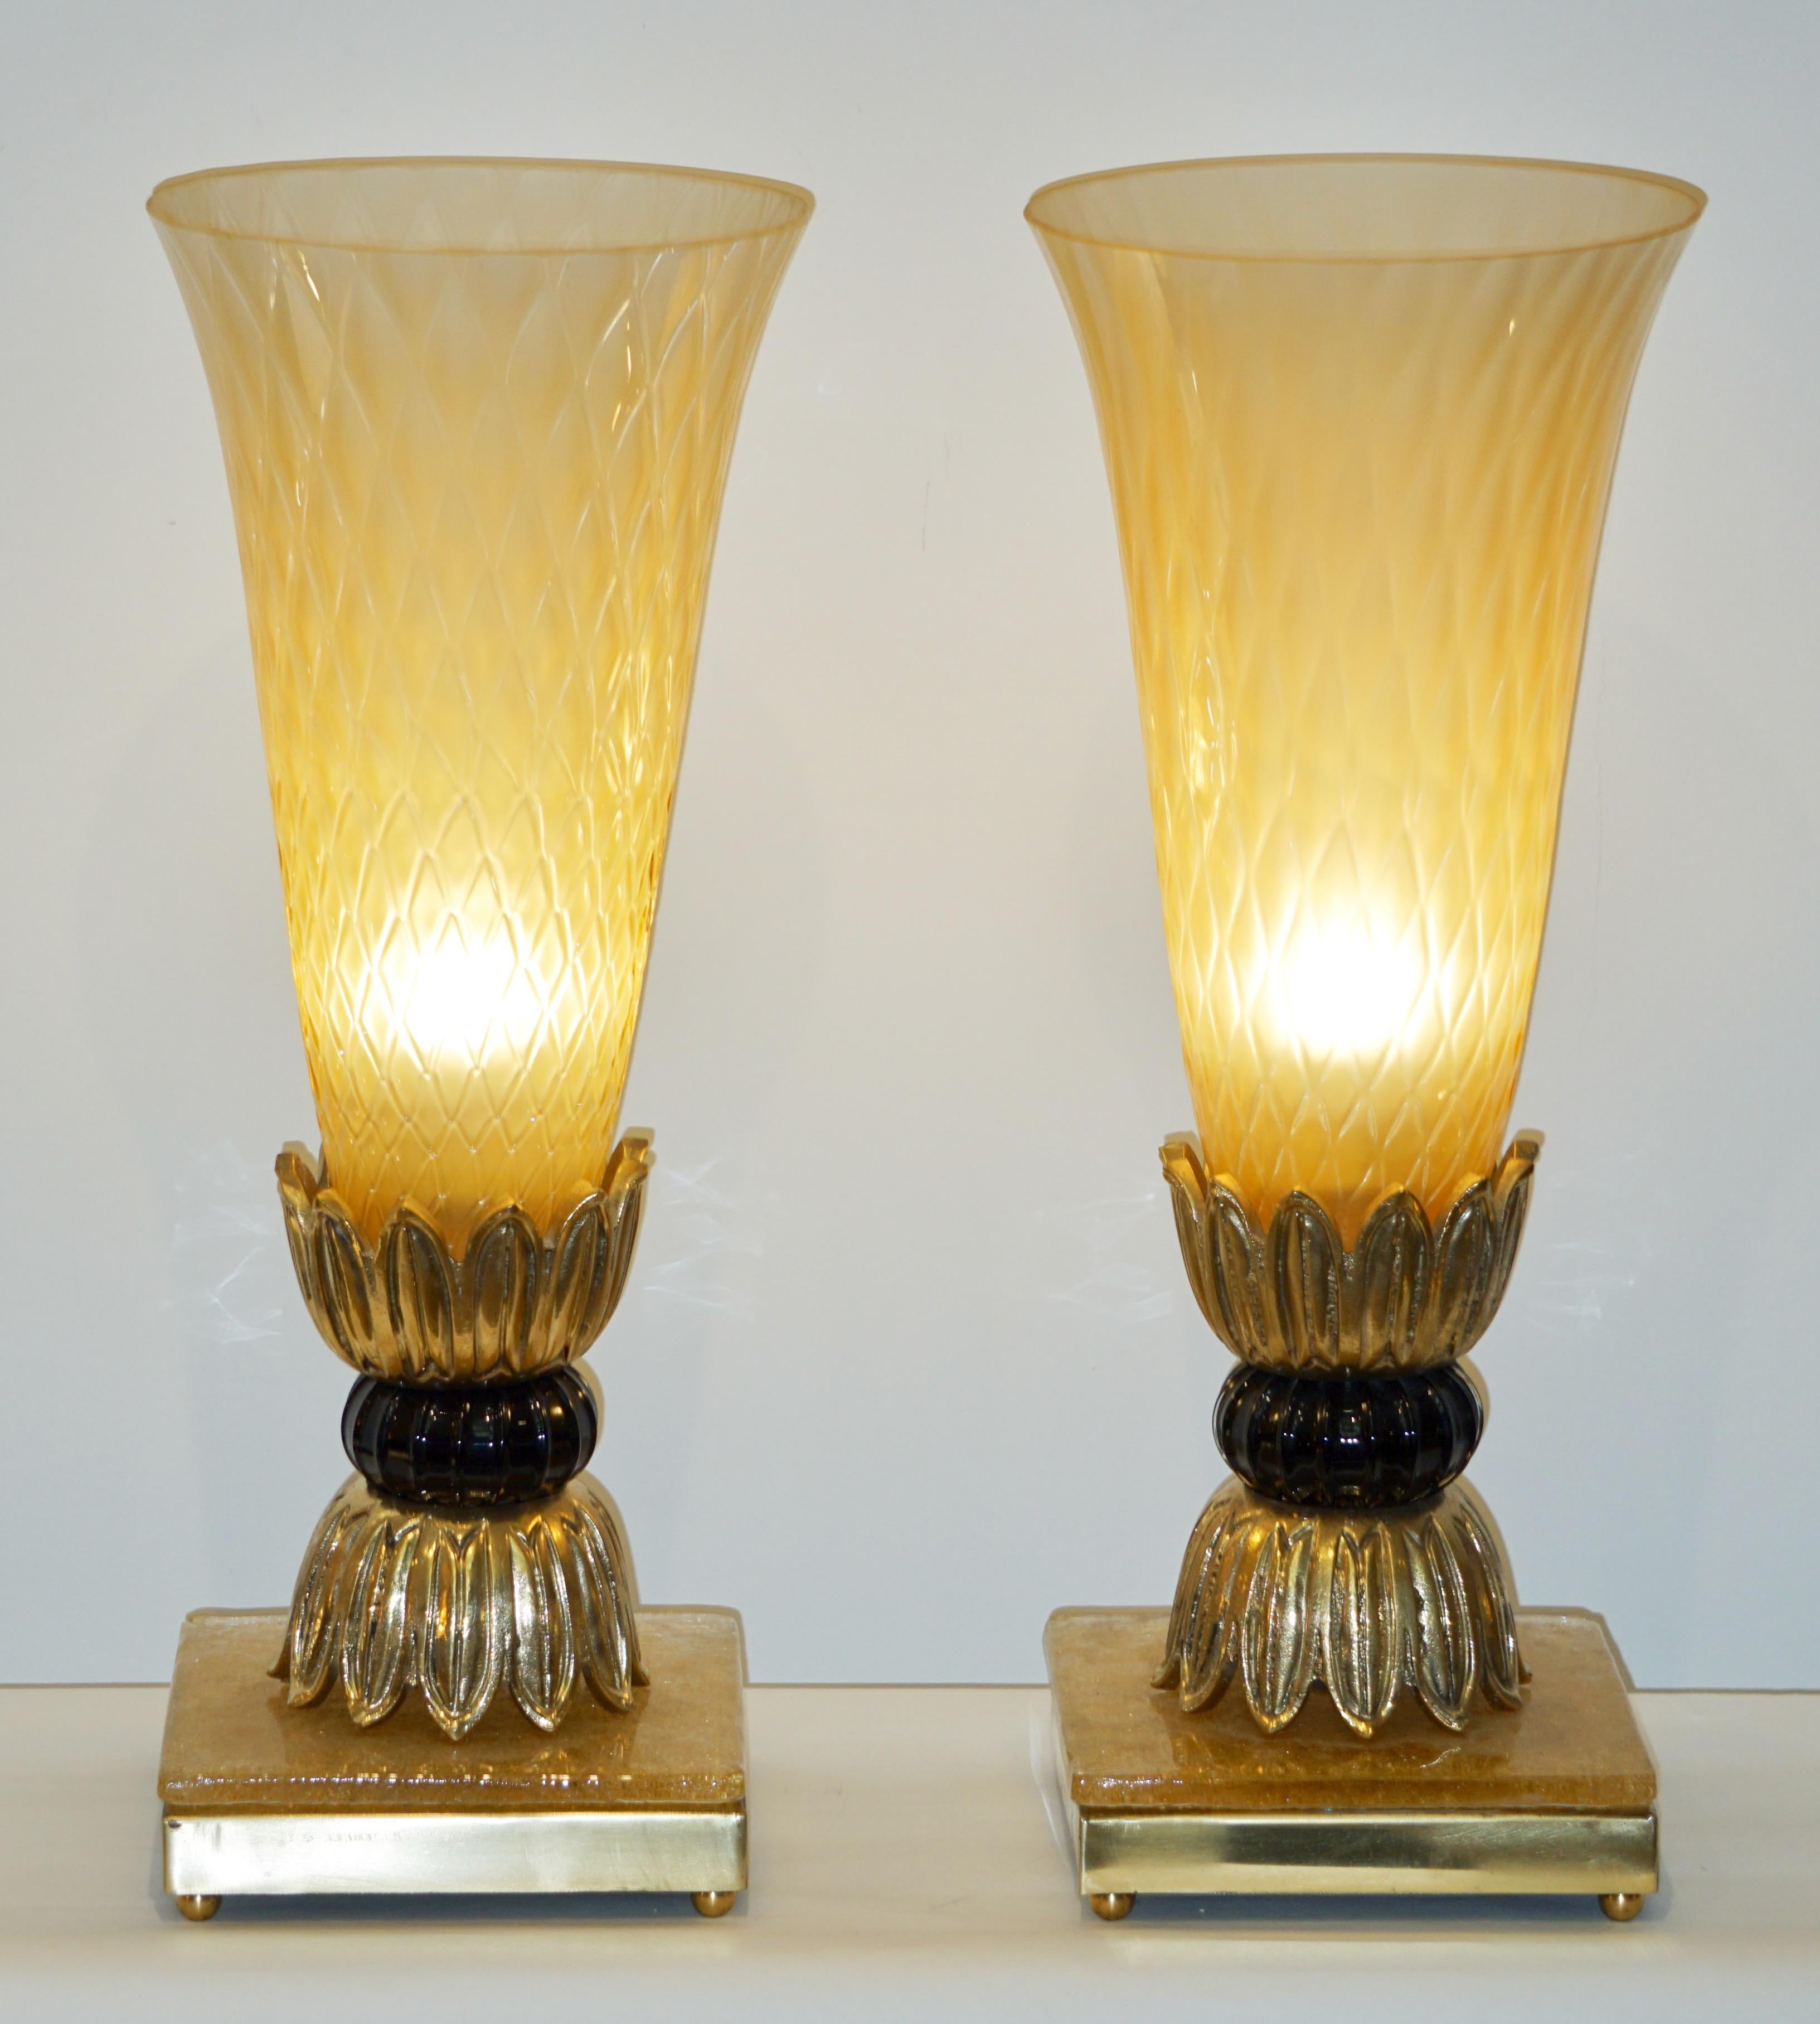 Elegant Italian pair of Art Deco design table lamps by Barovier Toso, circa 1970s, with exquisite Venetian blown glass shades in textured amber gold Murano glass decorated with a sophisticated hexagonal pattern, supported by cast bronze decorative